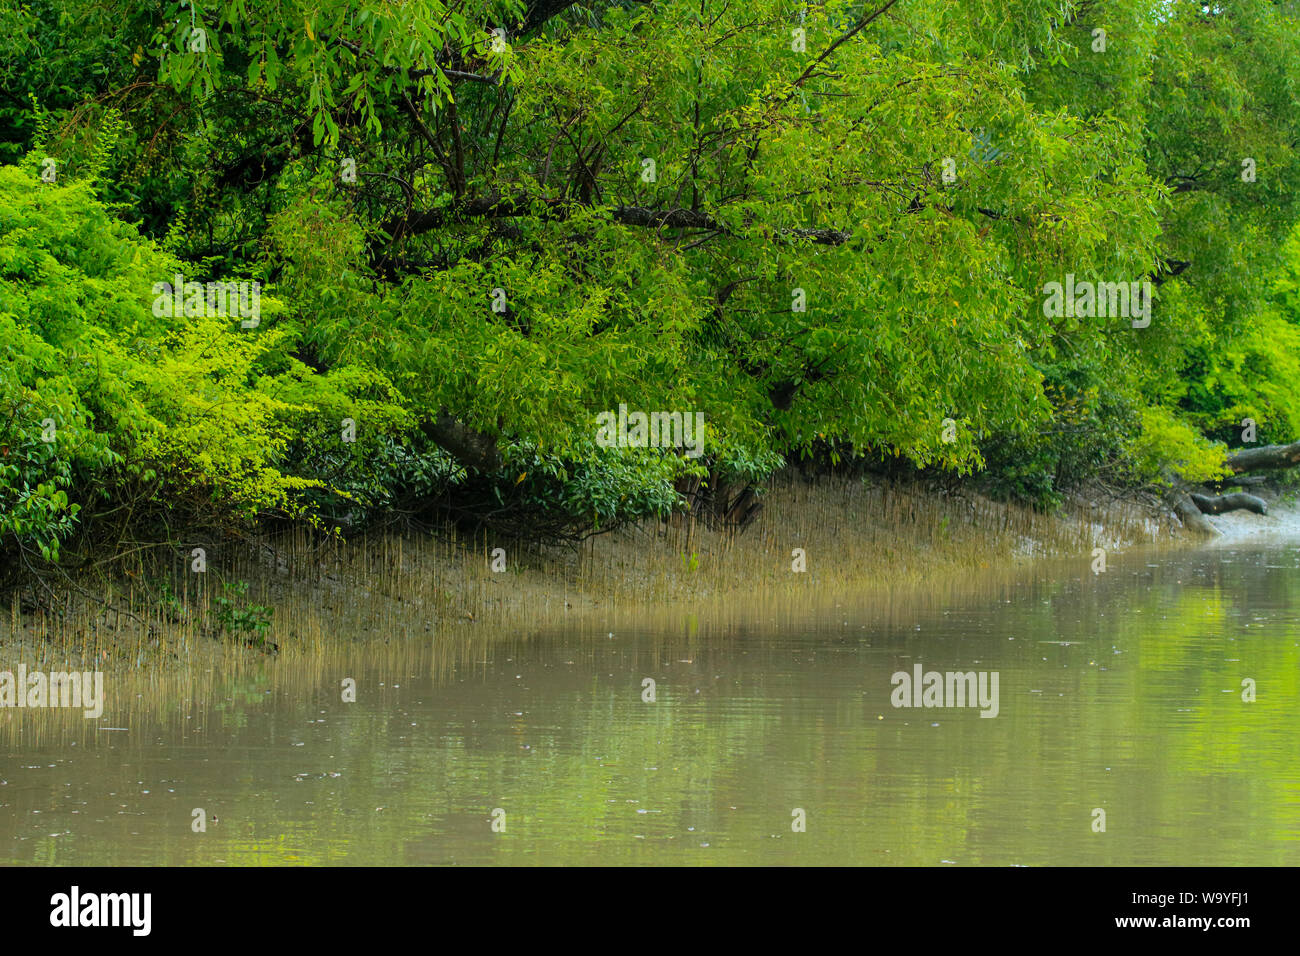 Sundarbans, the largest mangrove forest in the world. Bangladesh. Stock Photo